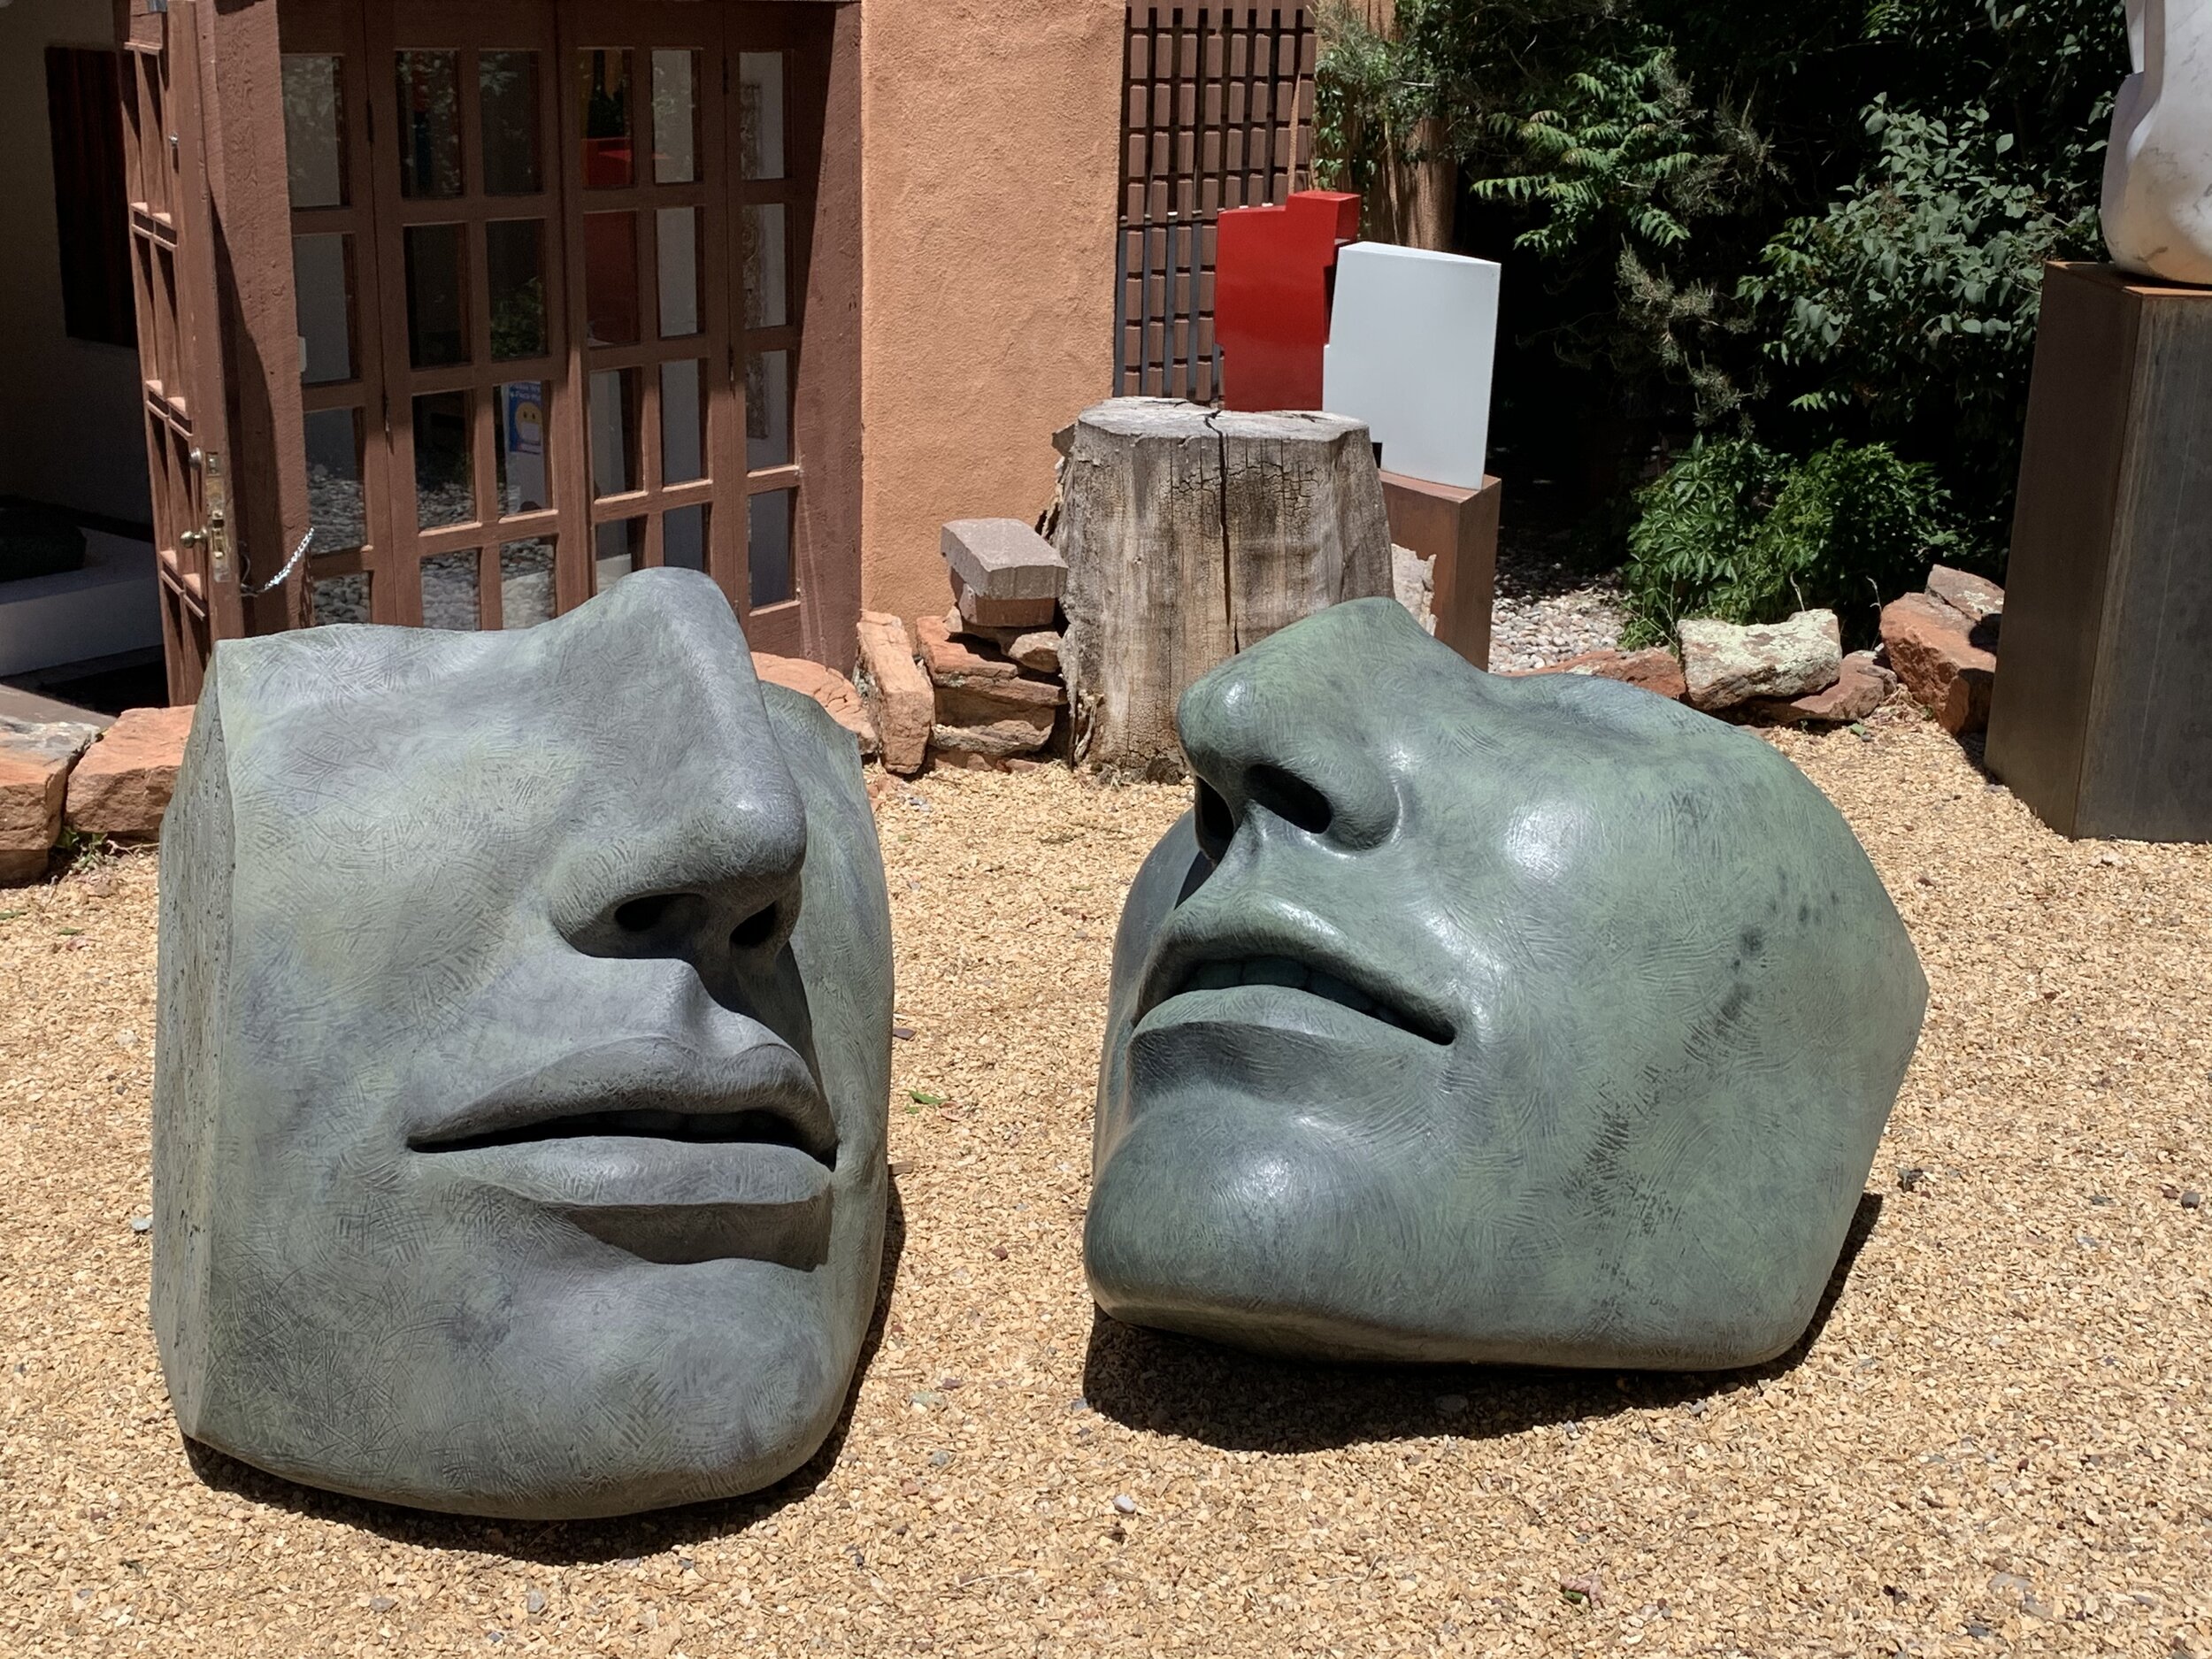  Santa Fe, New Mexico had a very different and sophisticated vibe. We walked down the famous Canyon Road and enjoyed all the outdoor art. With more than 250 art galleries, this town is sure to please anyone with an appreciation of visual arts.  